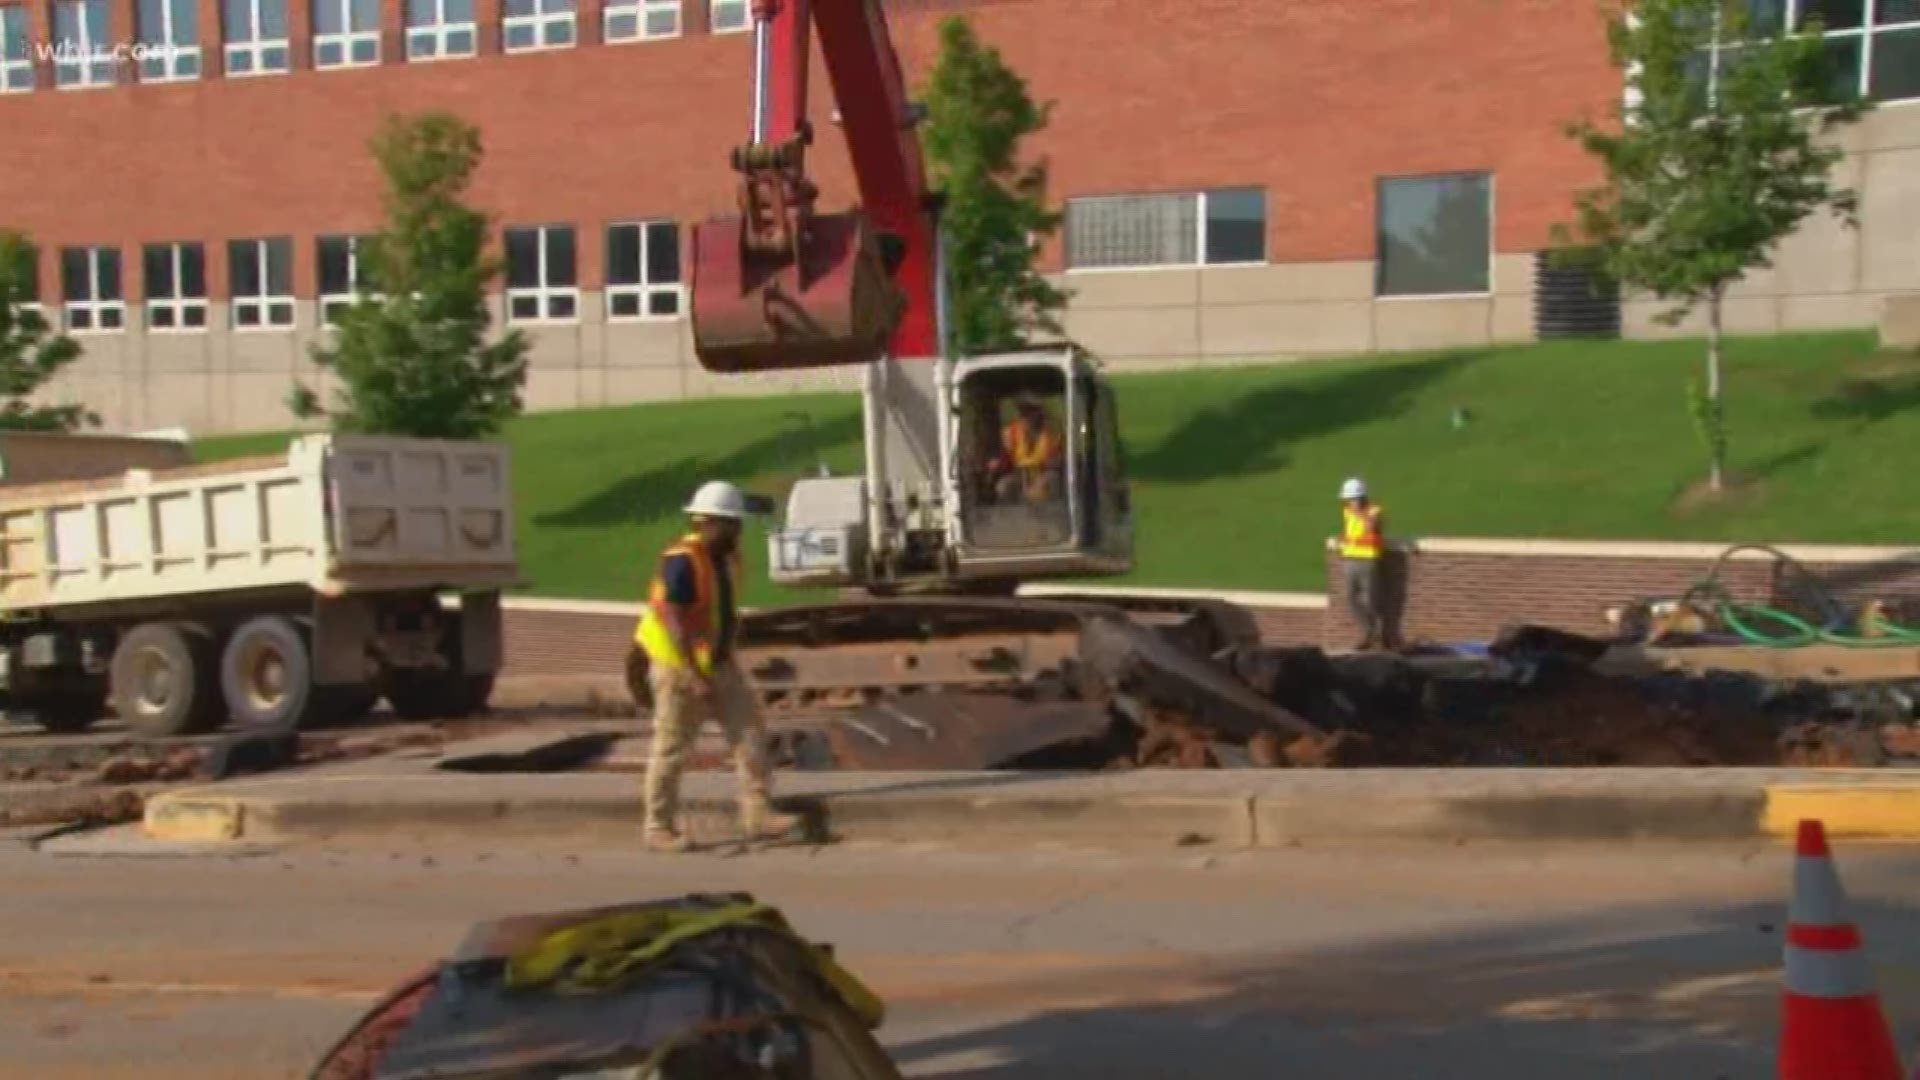 A water main break near UT is causing major traffic delays for drivers heading to campus.